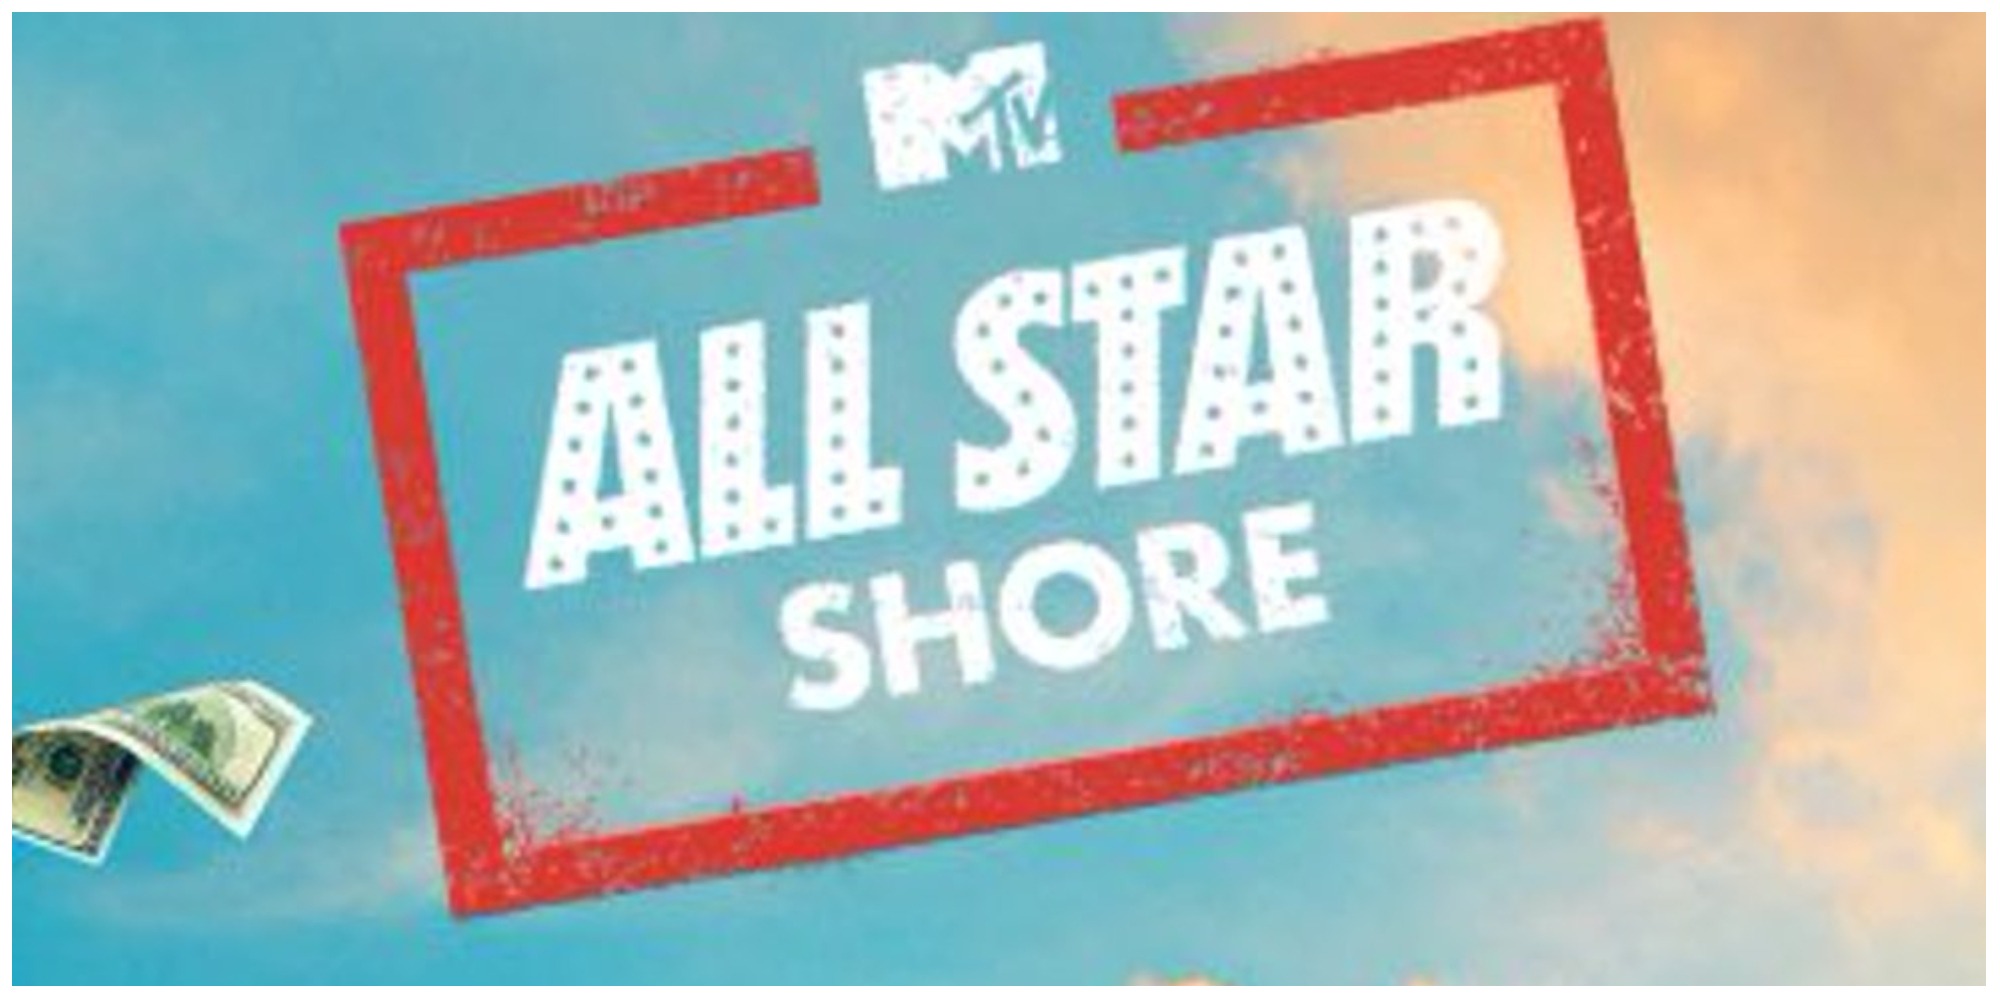 #All Star Shore: Season Two of MTV Series Features Reality Show Rivals (Watch)